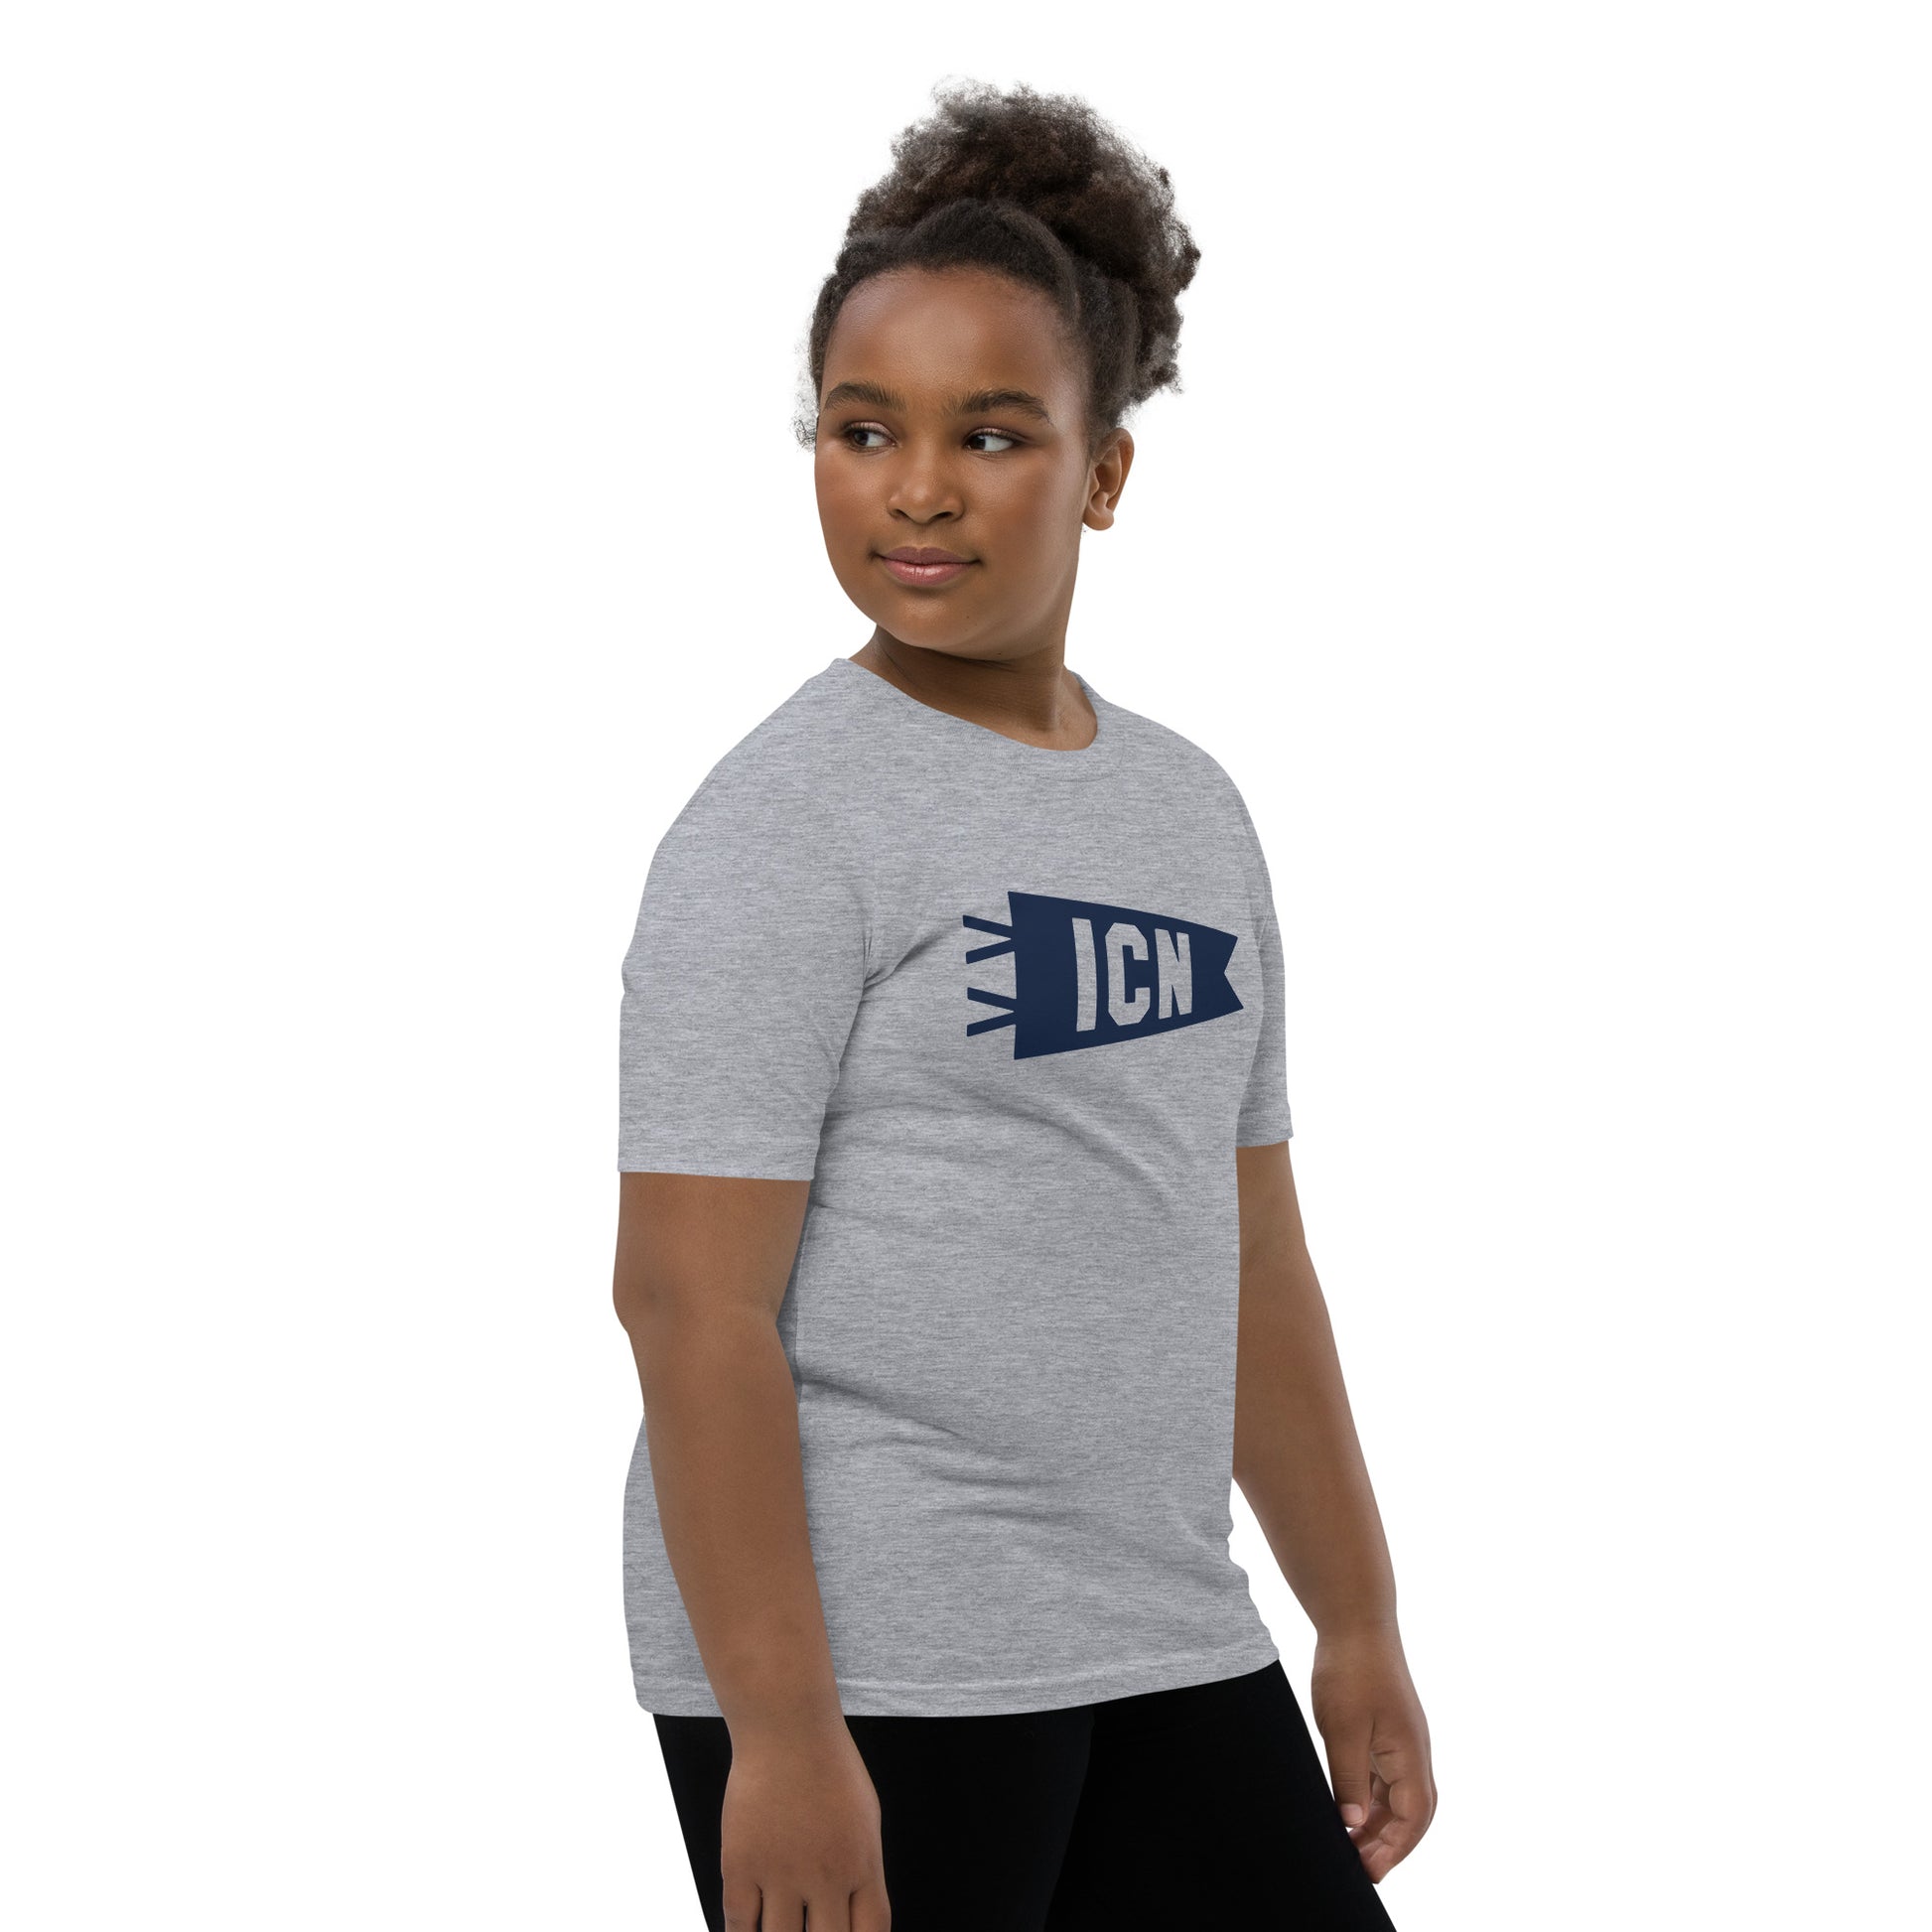 Kid's Airport Code Tee - Navy Blue Graphic • ICN Seoul • YHM Designs - Image 03